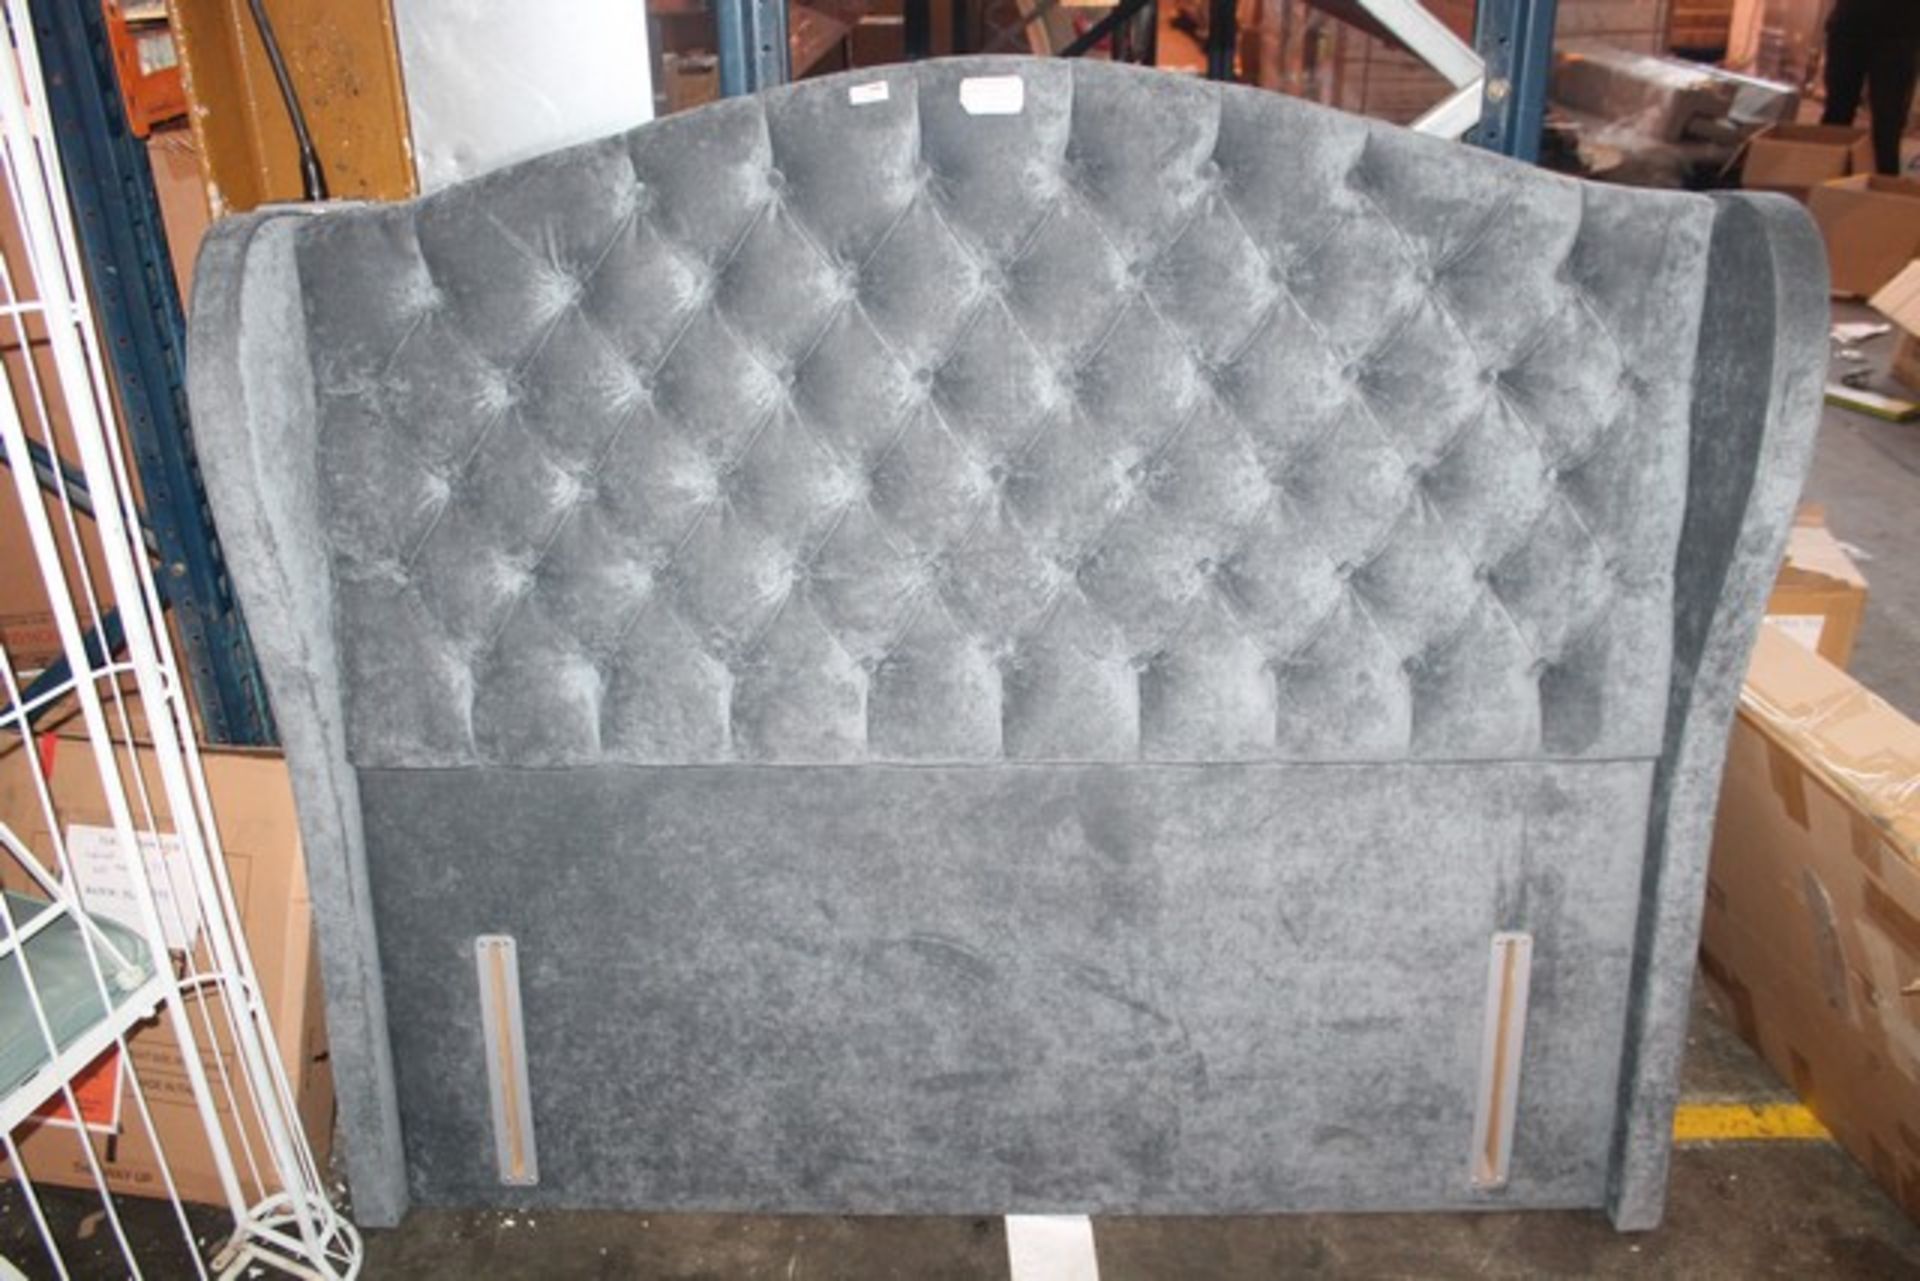 1 x TEMPUR 135CM STRUTTED GREY FABRIC UPHOLSTERED HEADBOARD RRP £1285 (17600031)  *PLEASE NOTE